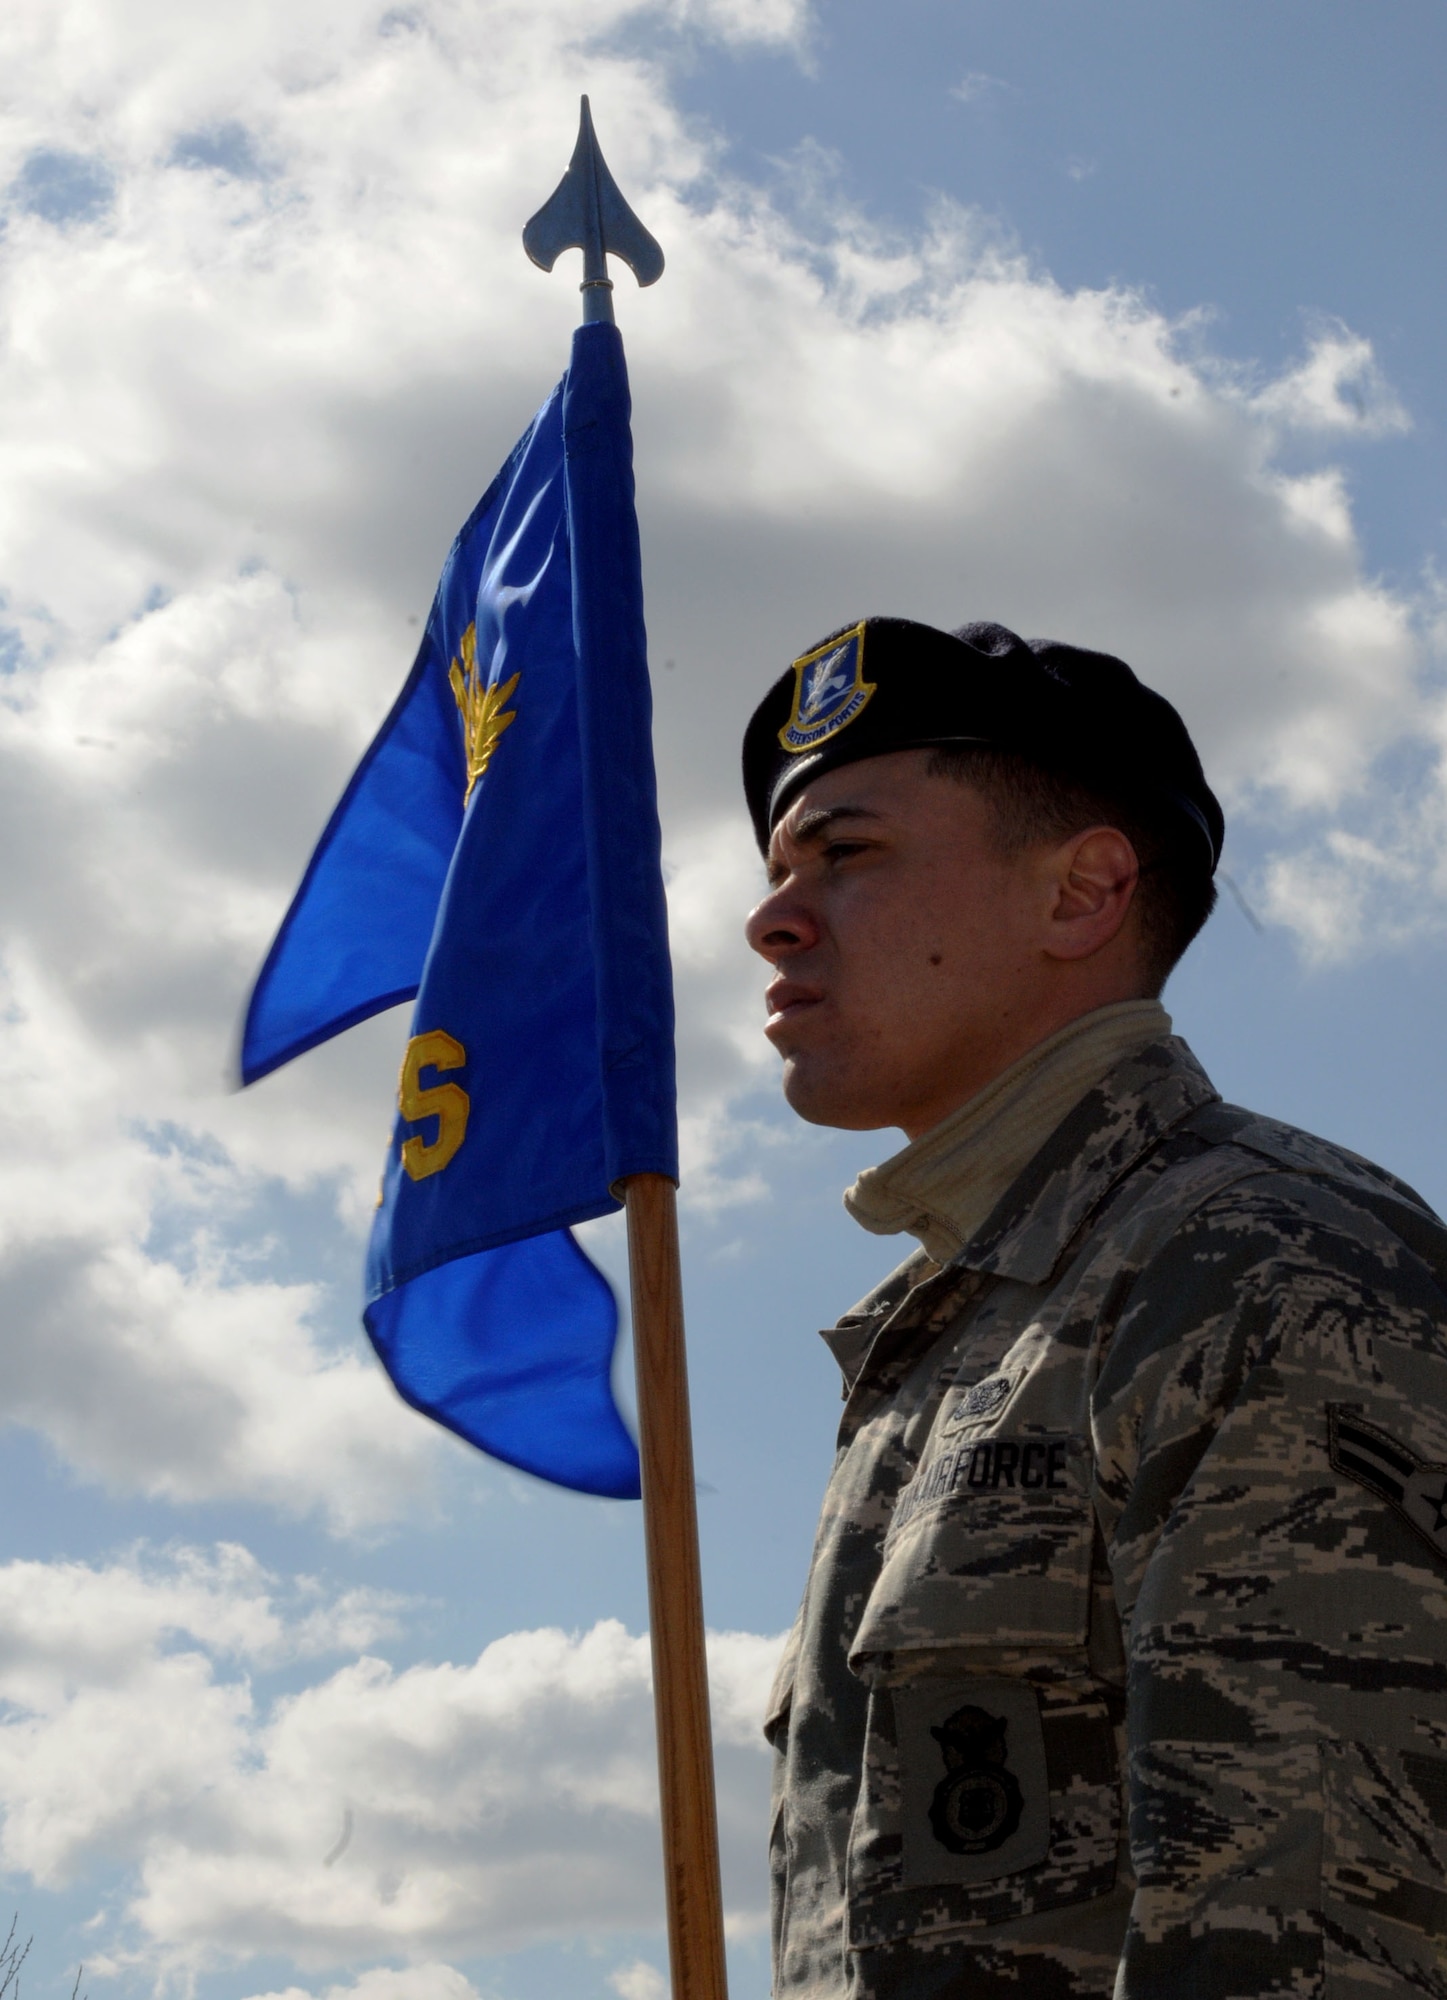 Airman 1st Class Eliezer Morales, 111th Security Forces Squadron, Horsham Air Guard Station, Pennsylvania, secures the unit's flag April 11, 2015, at  Gettysburg National Military Park. Morales was one of nearly 60 Guardsmen from the 111th Attack Wing’s security forces squadron who participated in a four-day team building and skills-training event, April 9 – 12, 2015, at the state’s joint-force training center at Fort Indiantown Gap, Pennsylvania and at Gettysburg National Military Park. (U.S. Air National Guard photo by Tech. Sgt. Andria Allmond/Released)